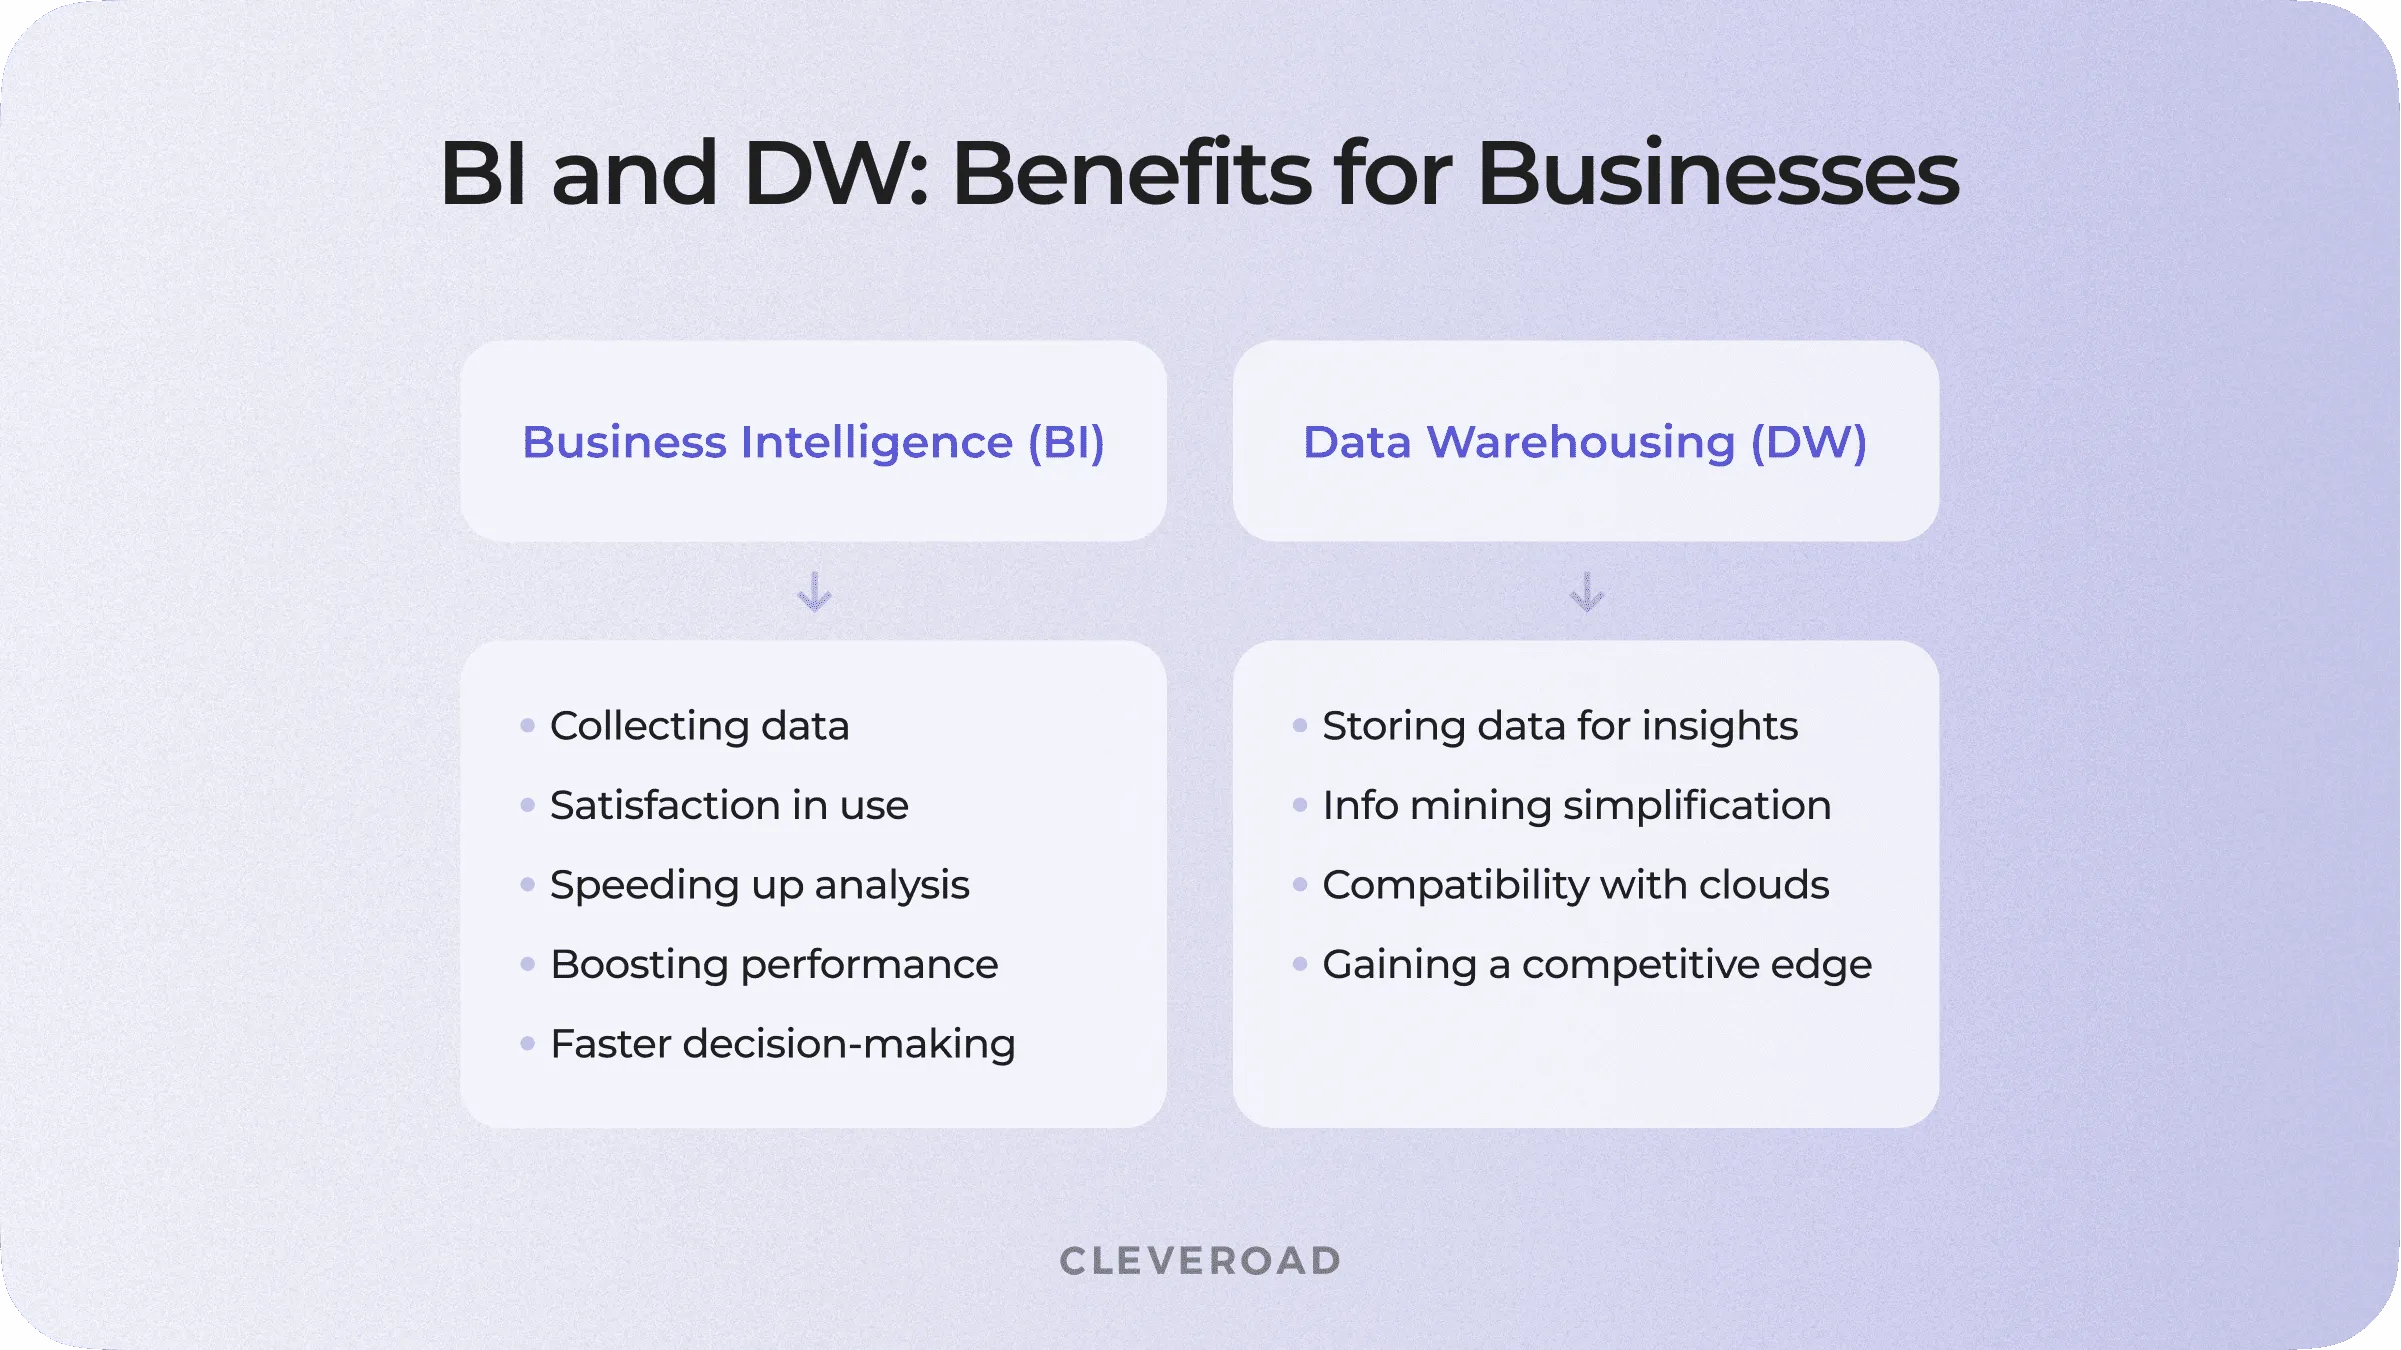 Business intelligence and data warehousing is used for: benefits for businesses